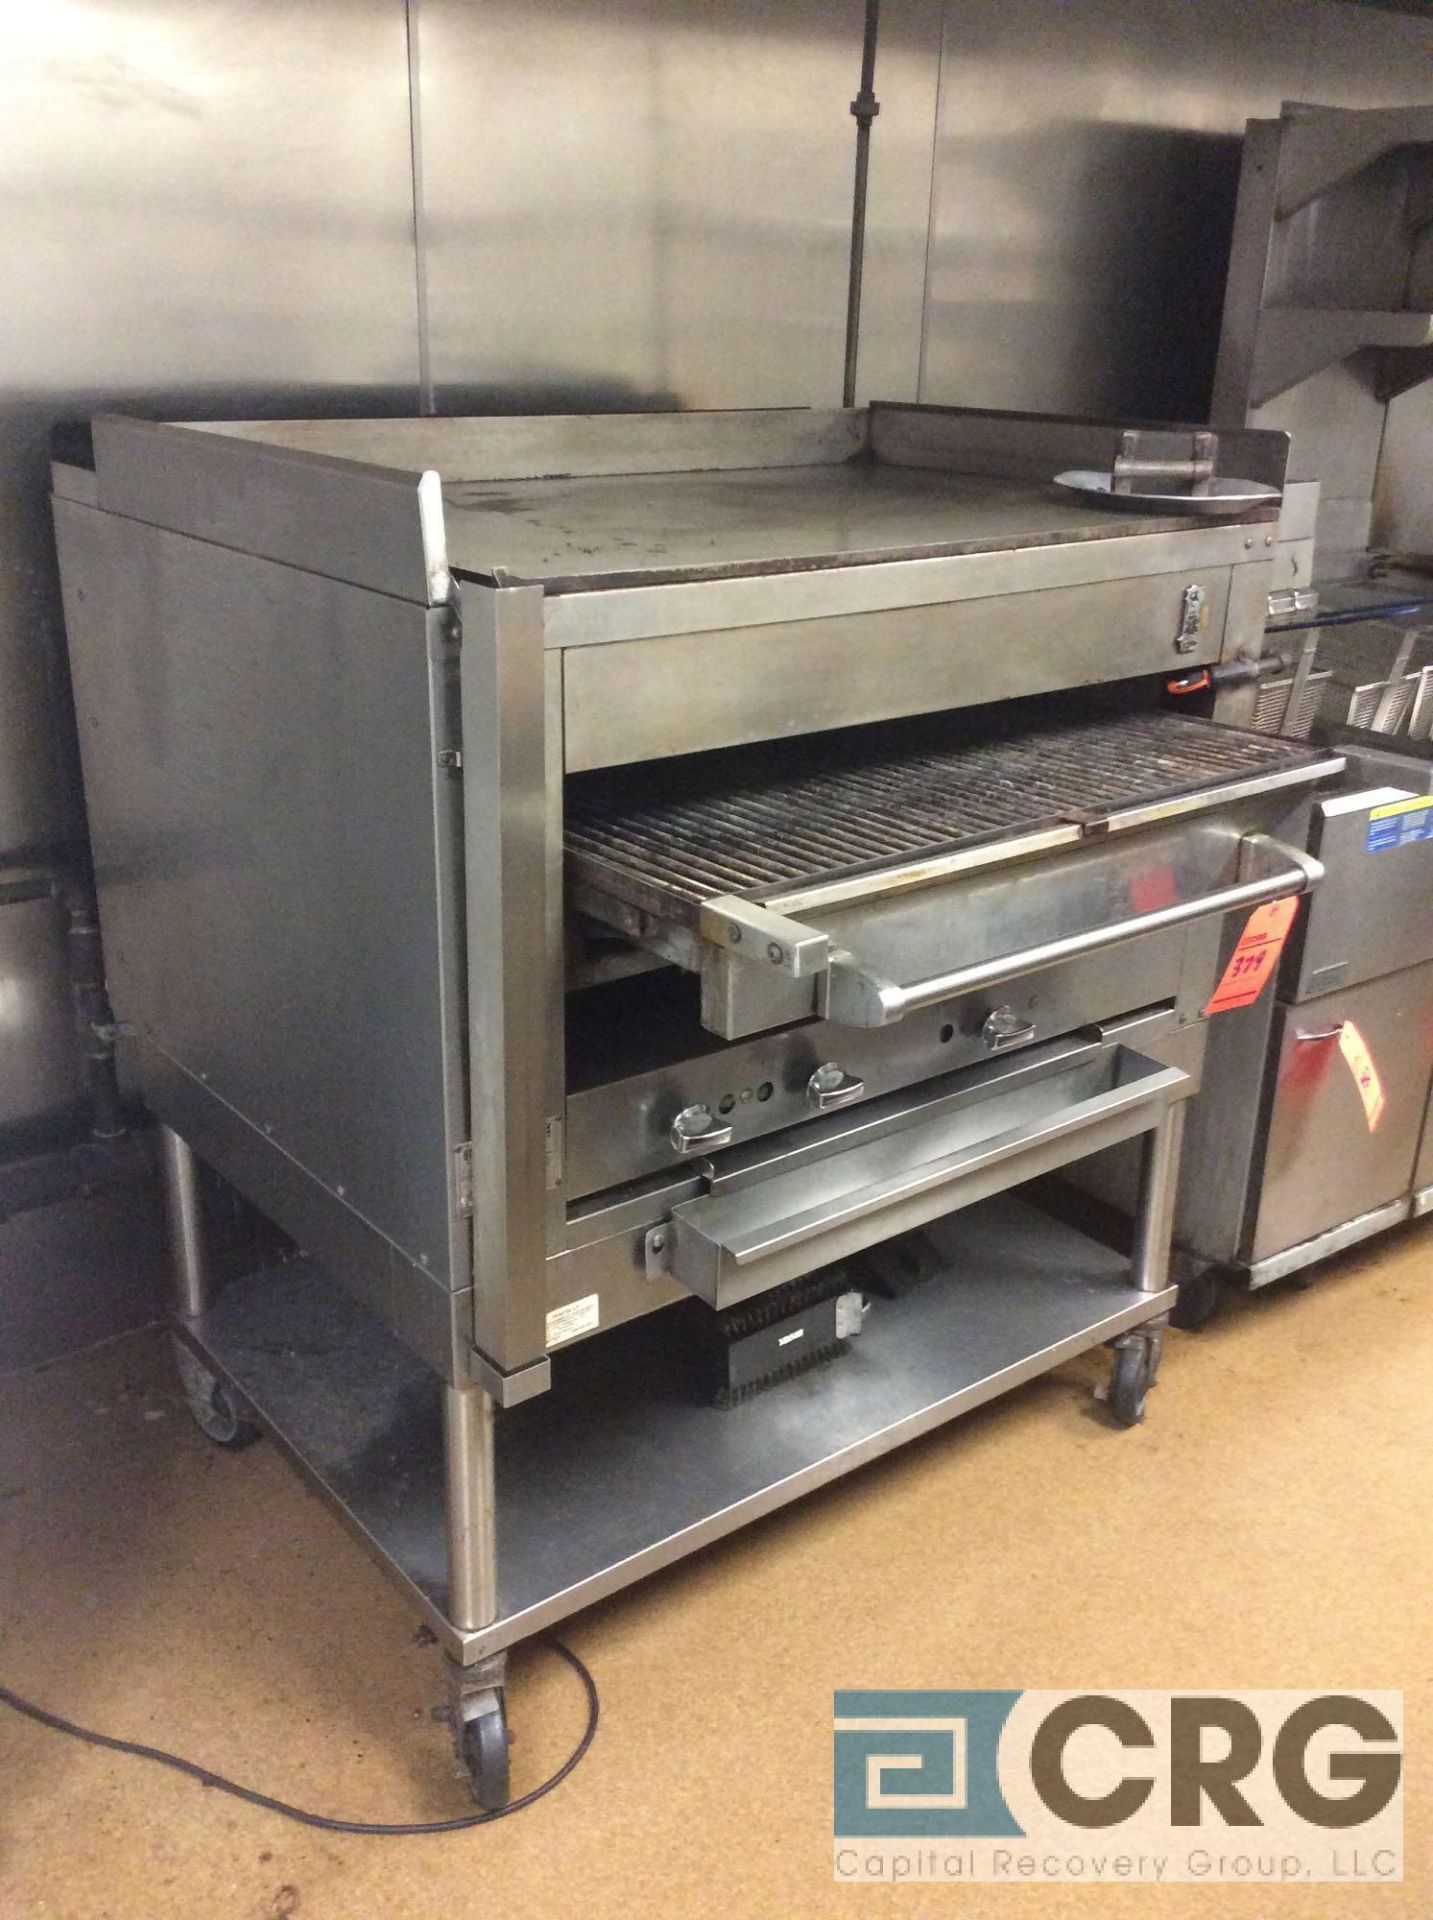 Montague C45-SHB portable stainless steel 36 inch portable charbroiler / grill, GAS, (buyer needs to